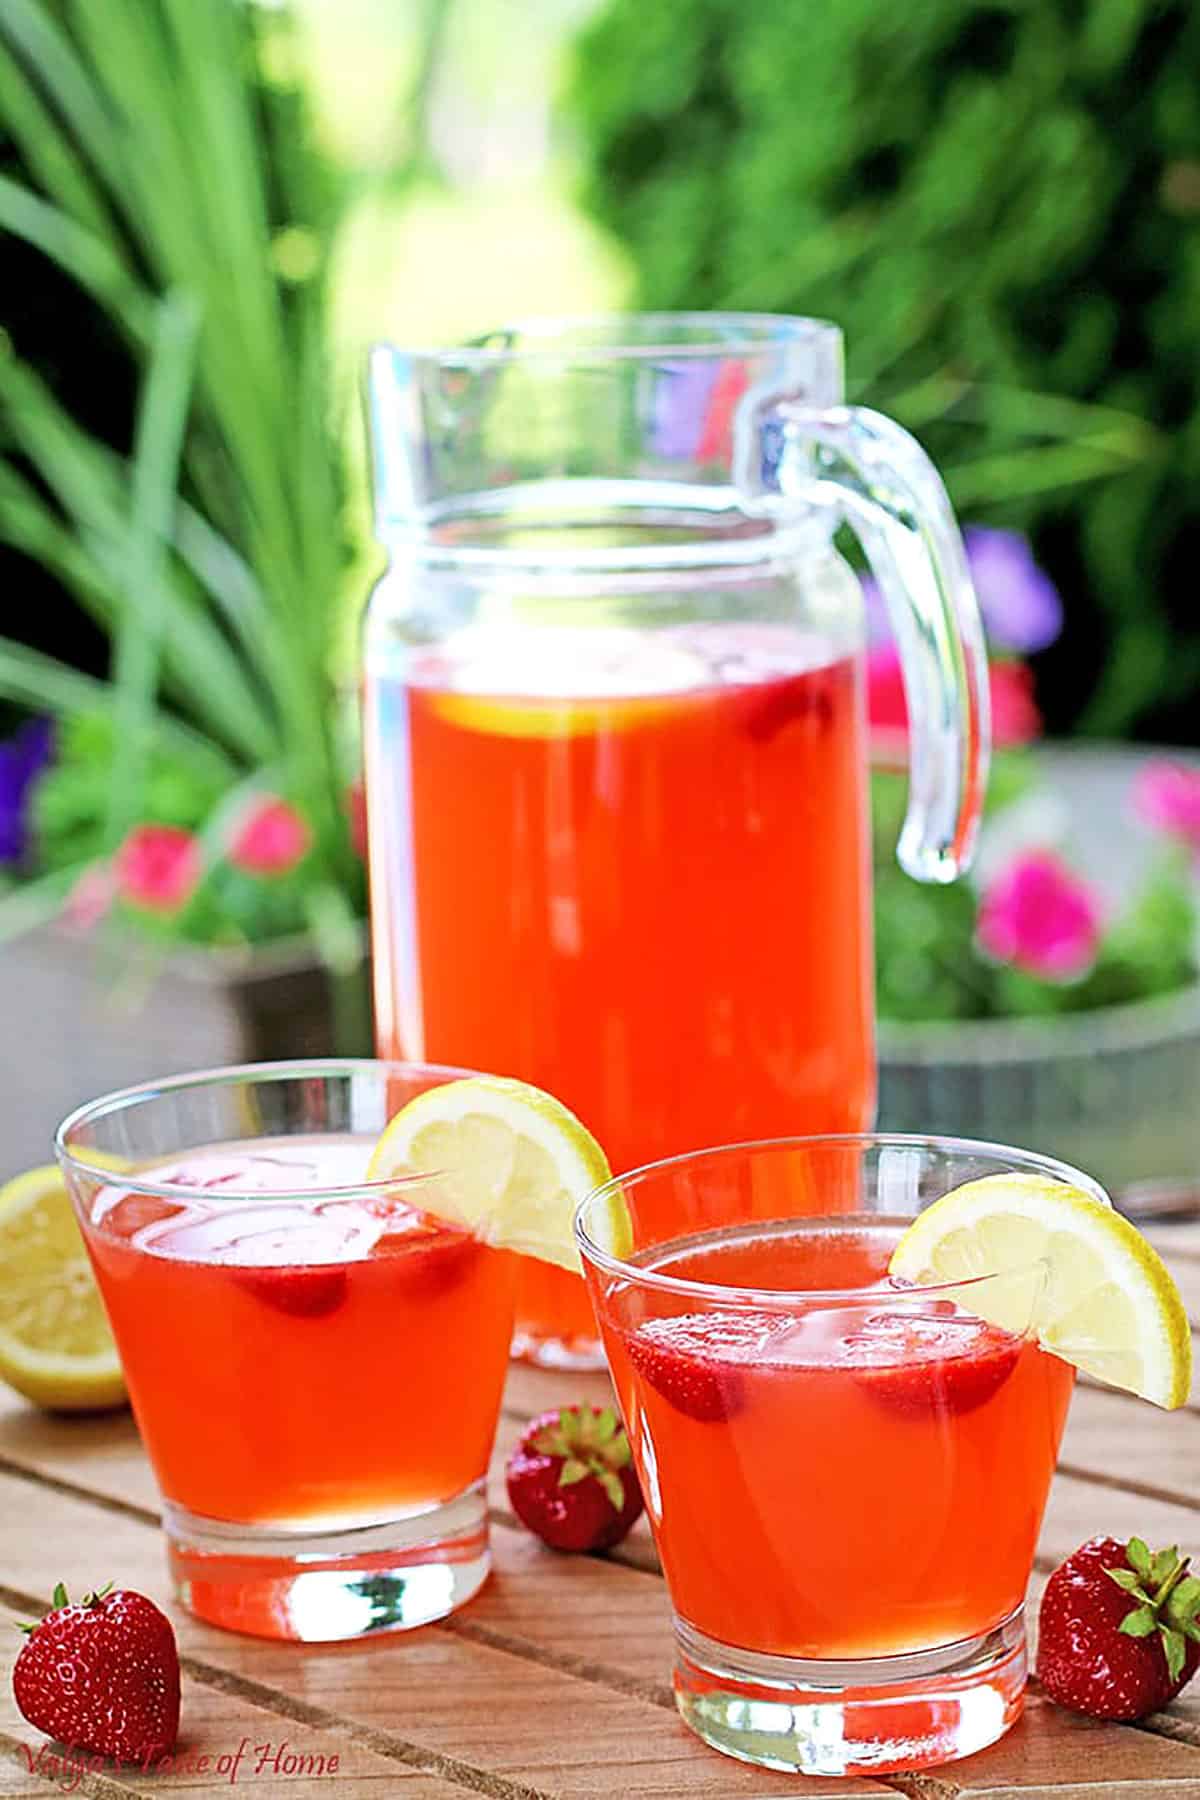 This easy-to-make recipe is refreshing and the perfect summer drink! It tastes absolutely incredible in every sip and is made from scratch!